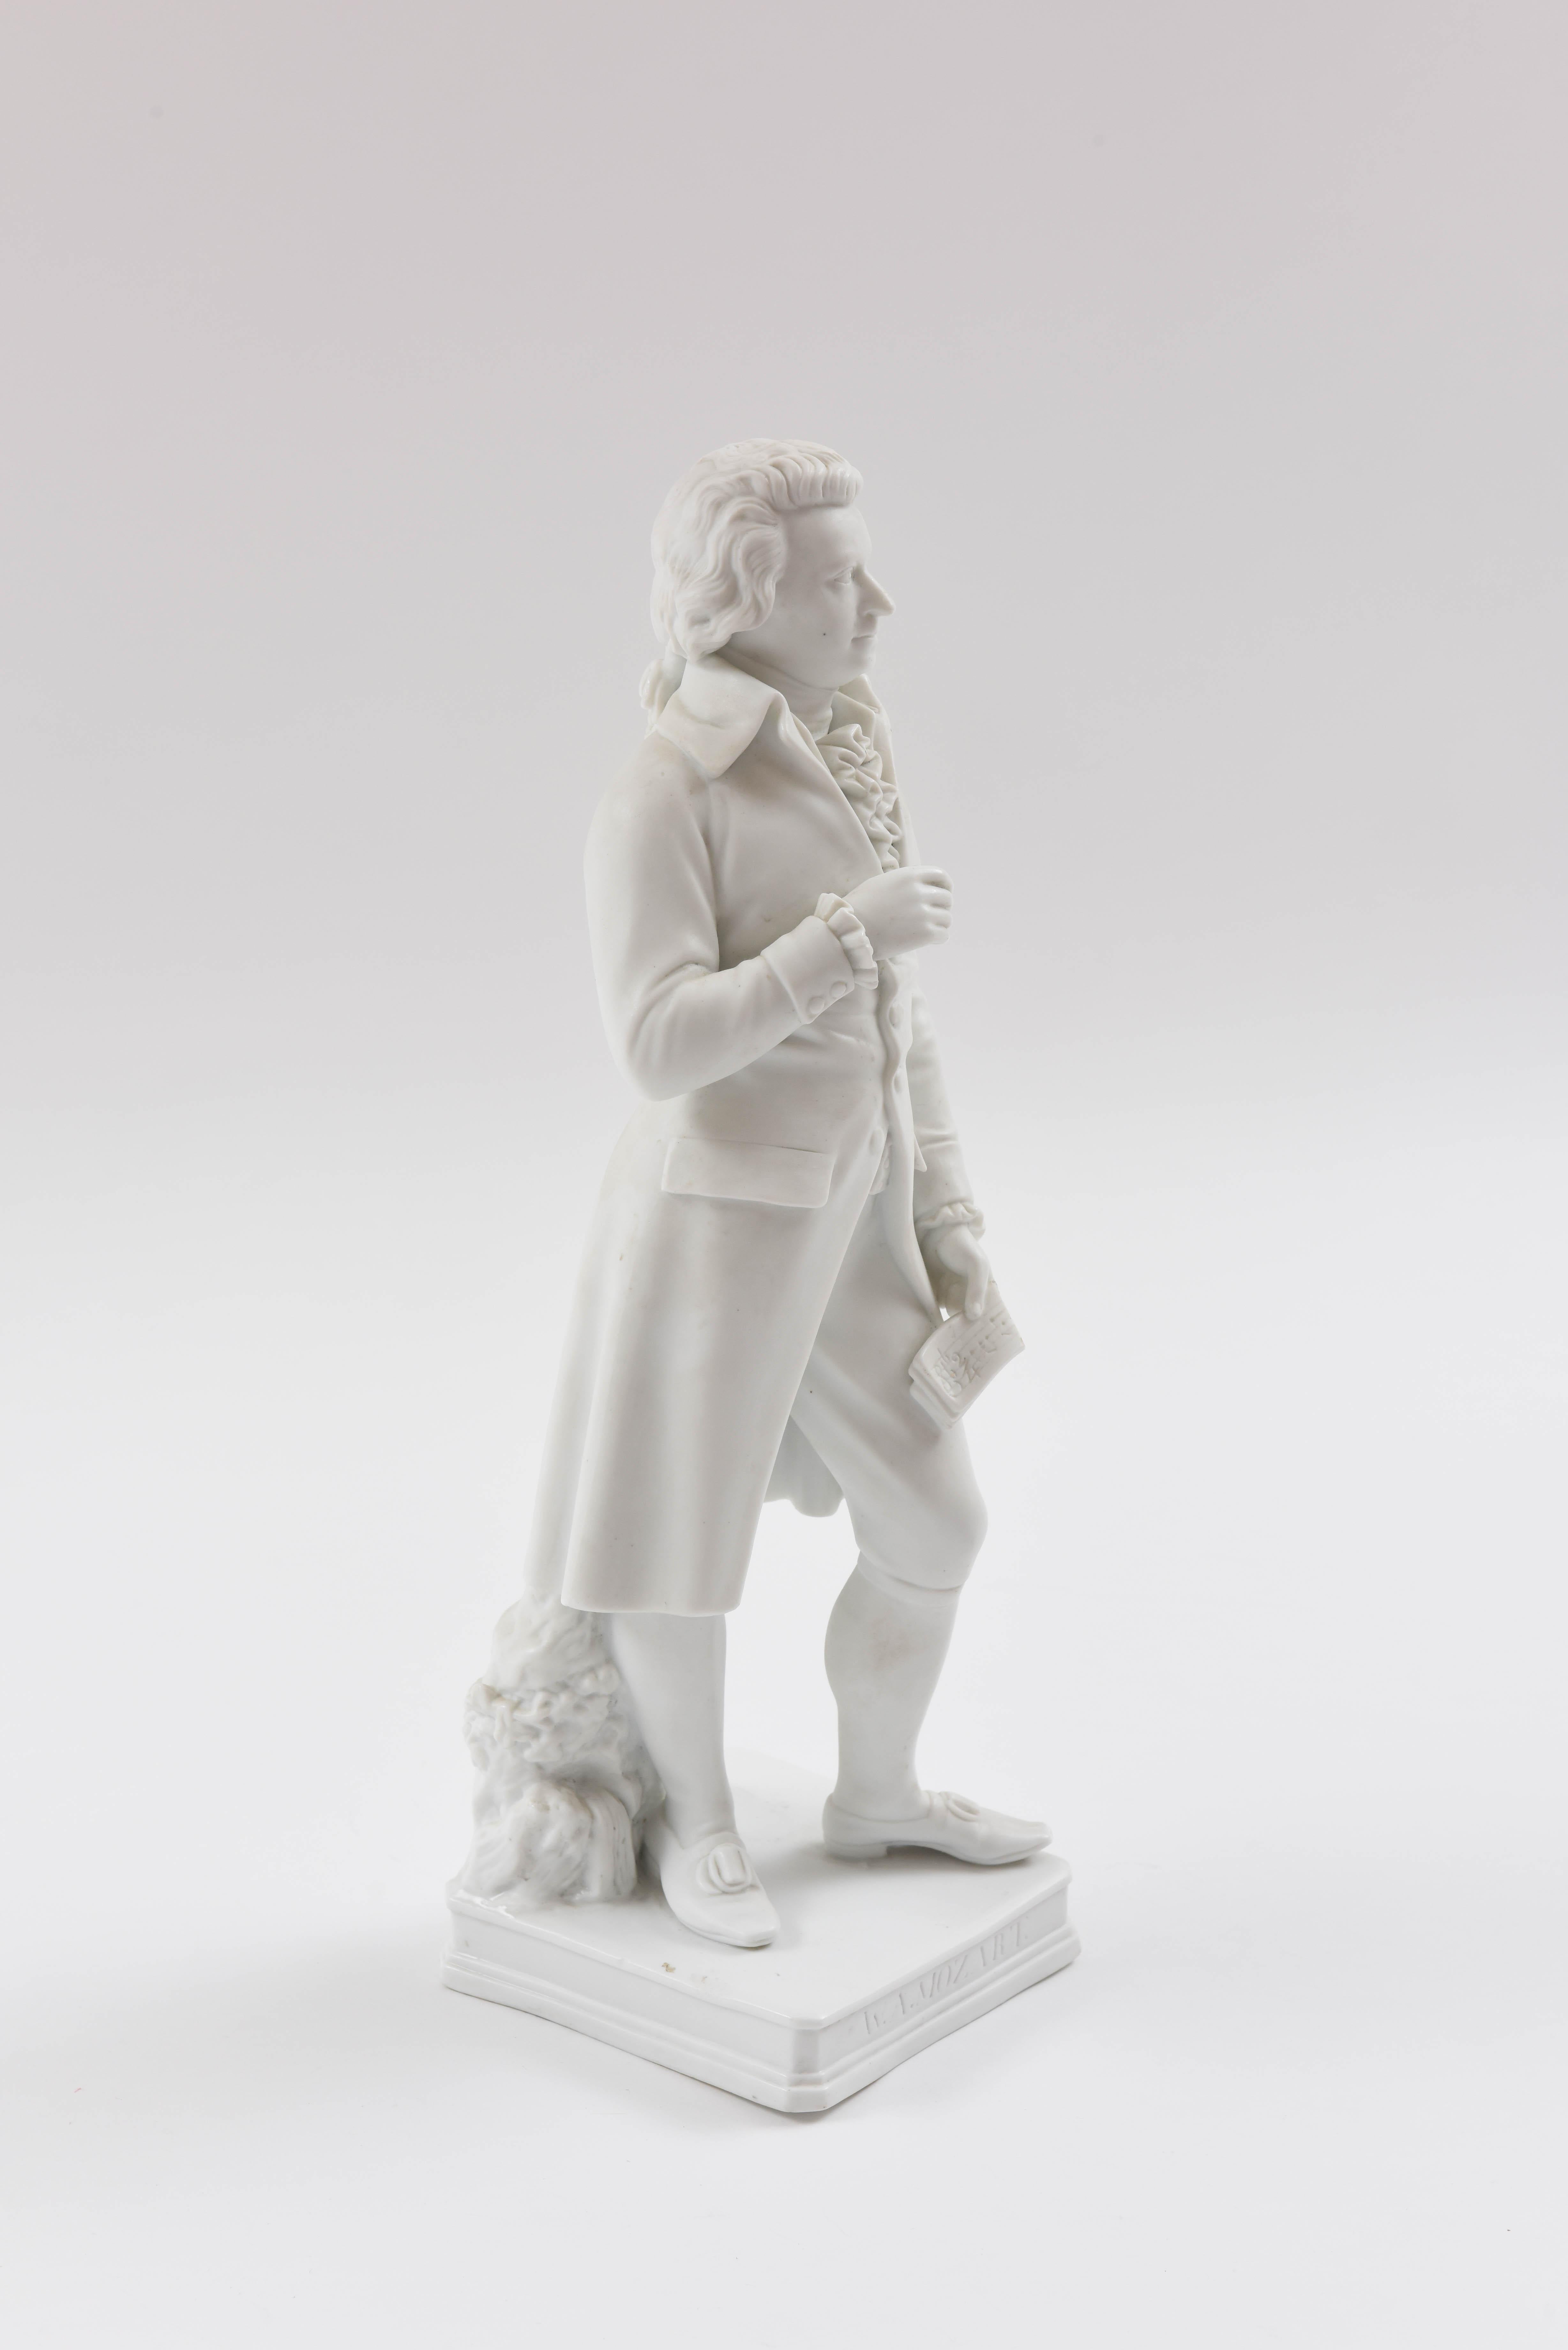 Hand-Crafted Mozart White Parian Figure, 19th Century, Tall and Regal